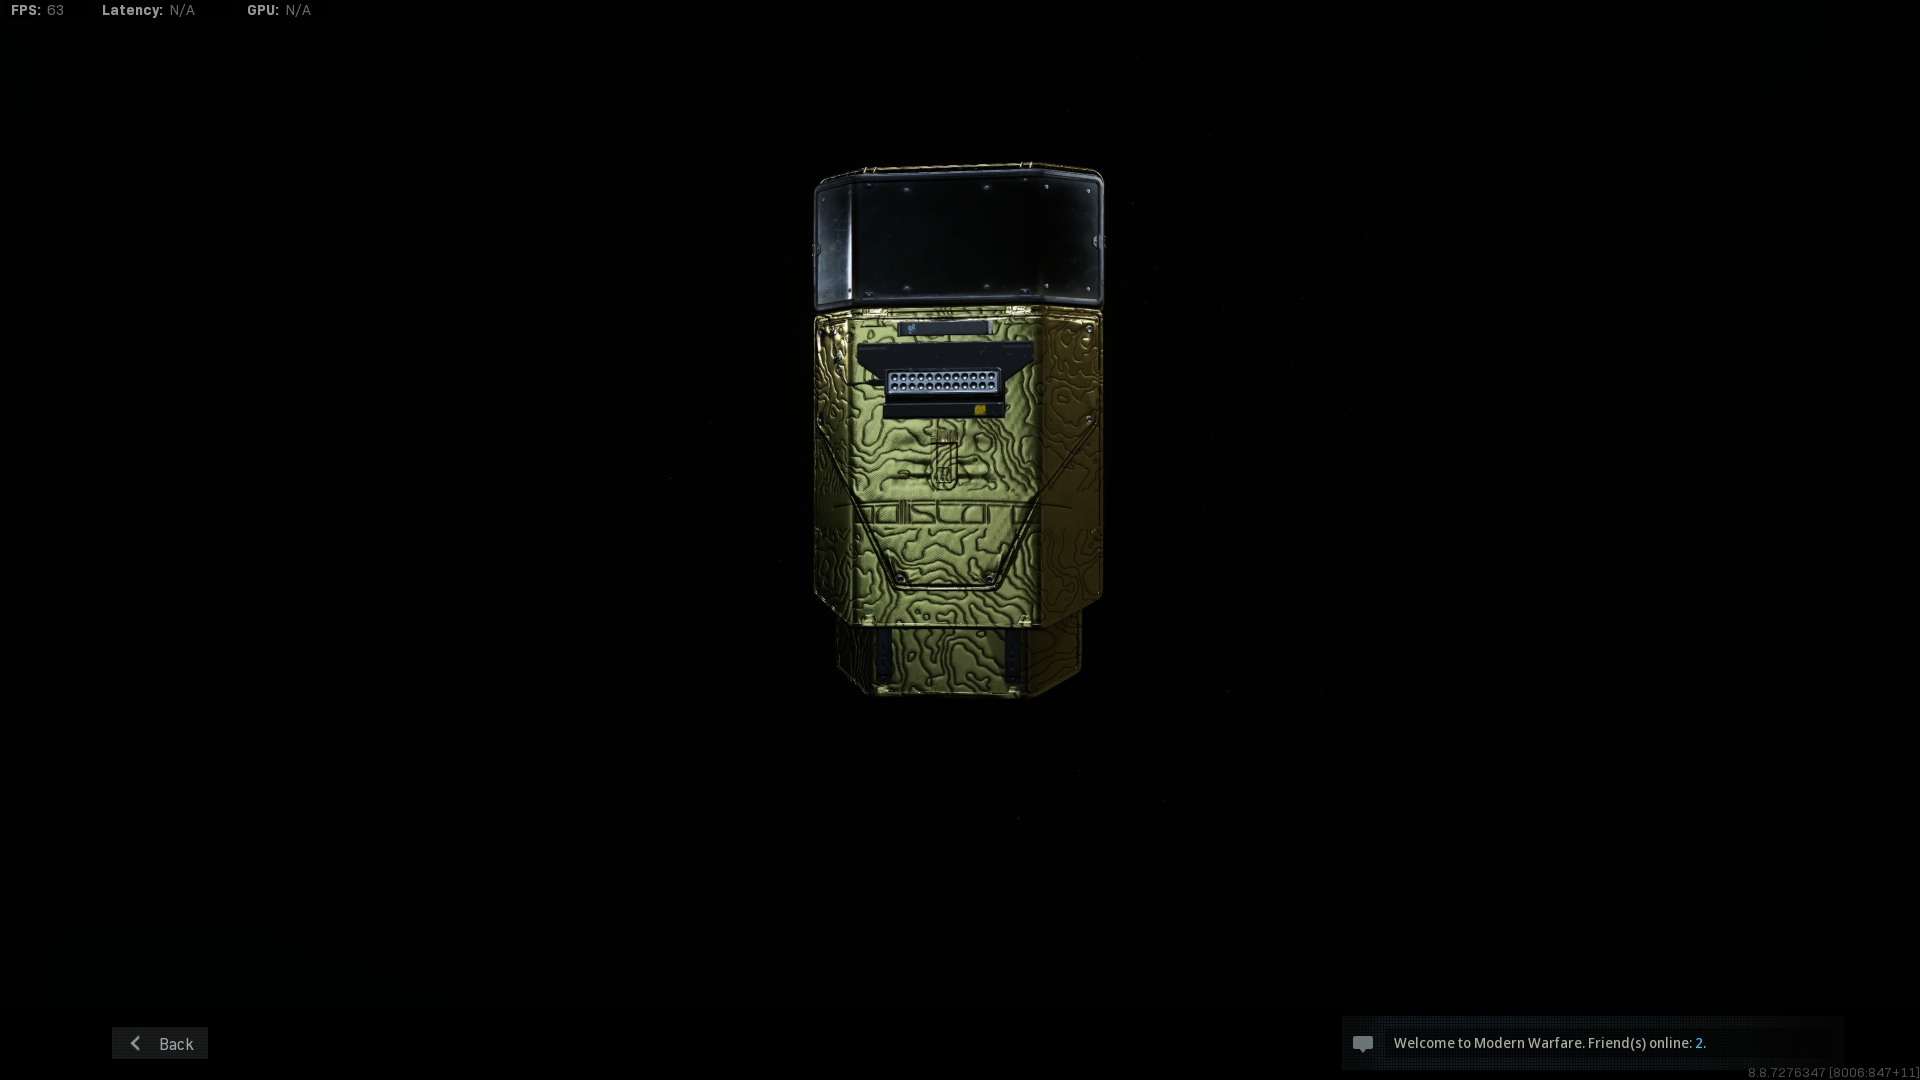 IW made the gold riot shield camo cover the entire riot shield. Thanks!